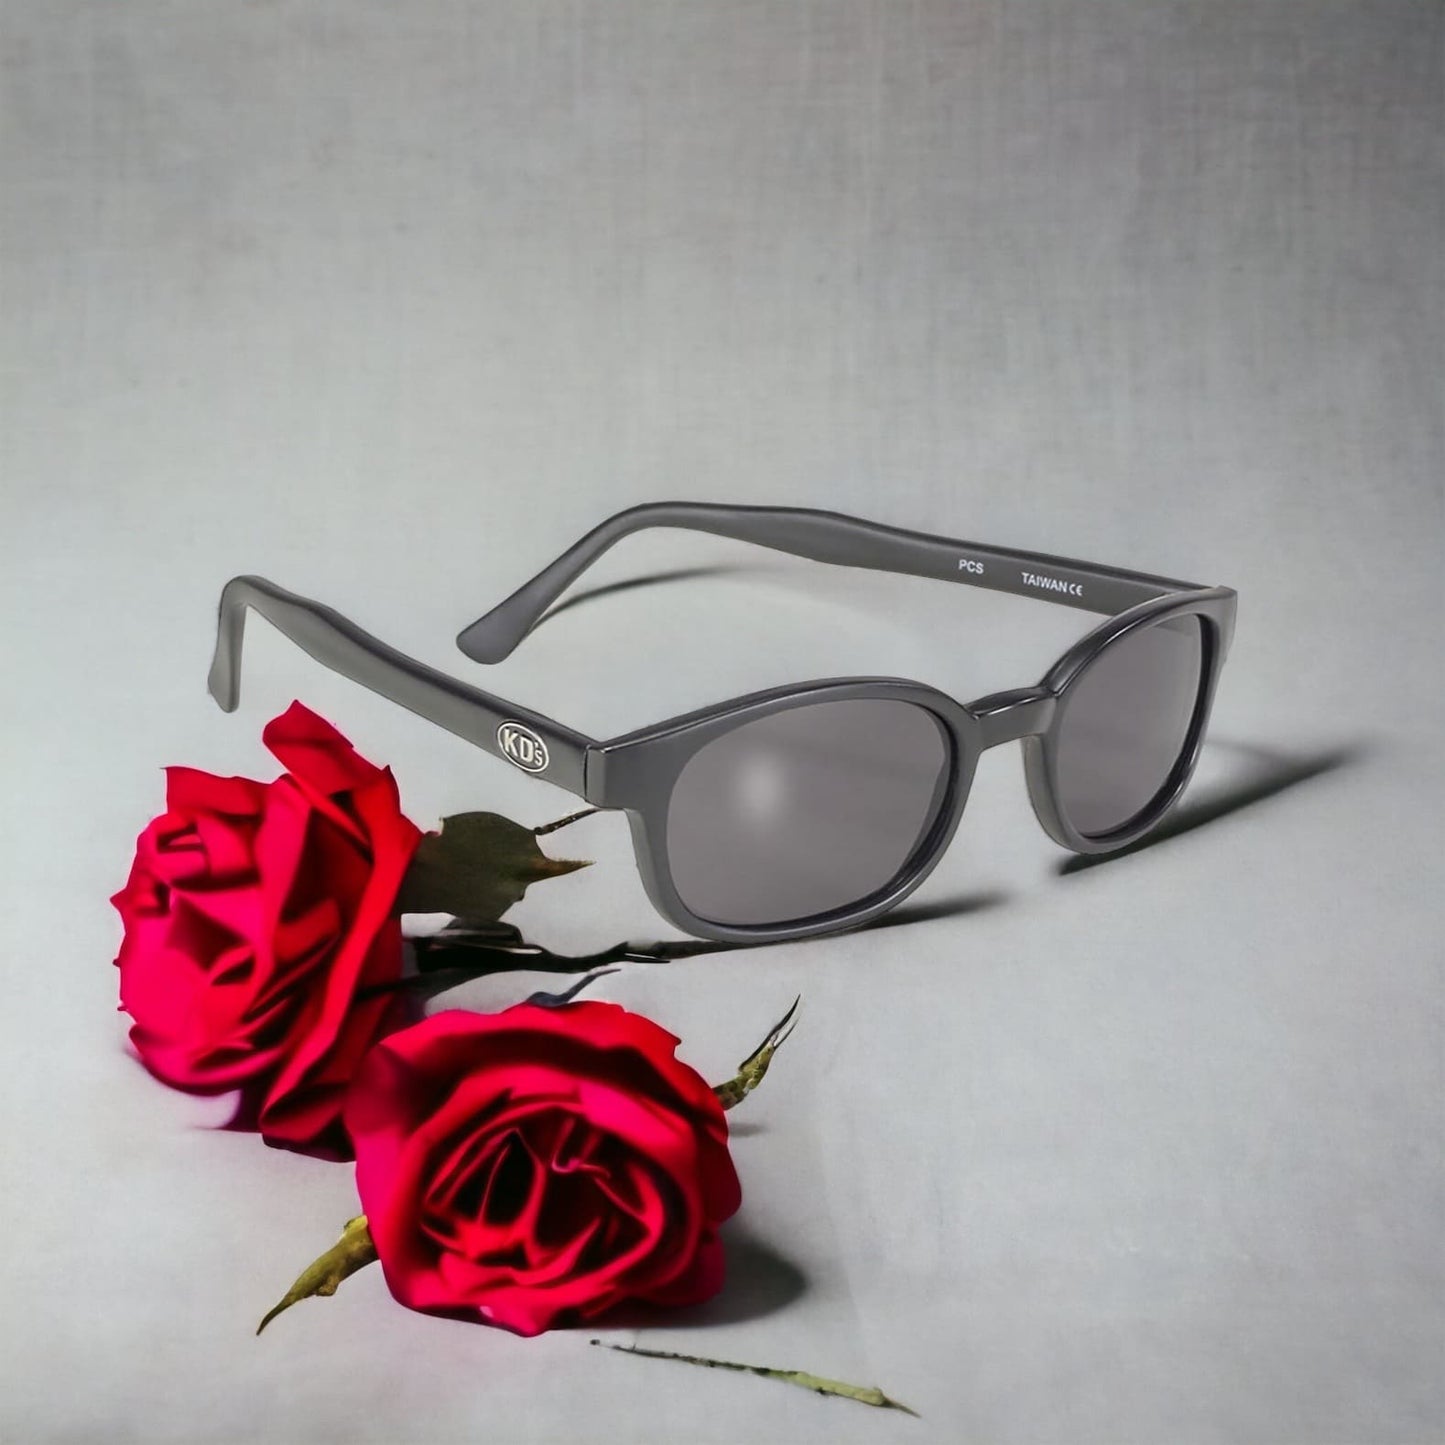 KD's 20010 sunglasses worn by Jax Teller and the members of SAMCRO in Sons of Anarchy, which fit under a helmet. With a solid matte black frame and polycarbonate sunglasses set behind roses.